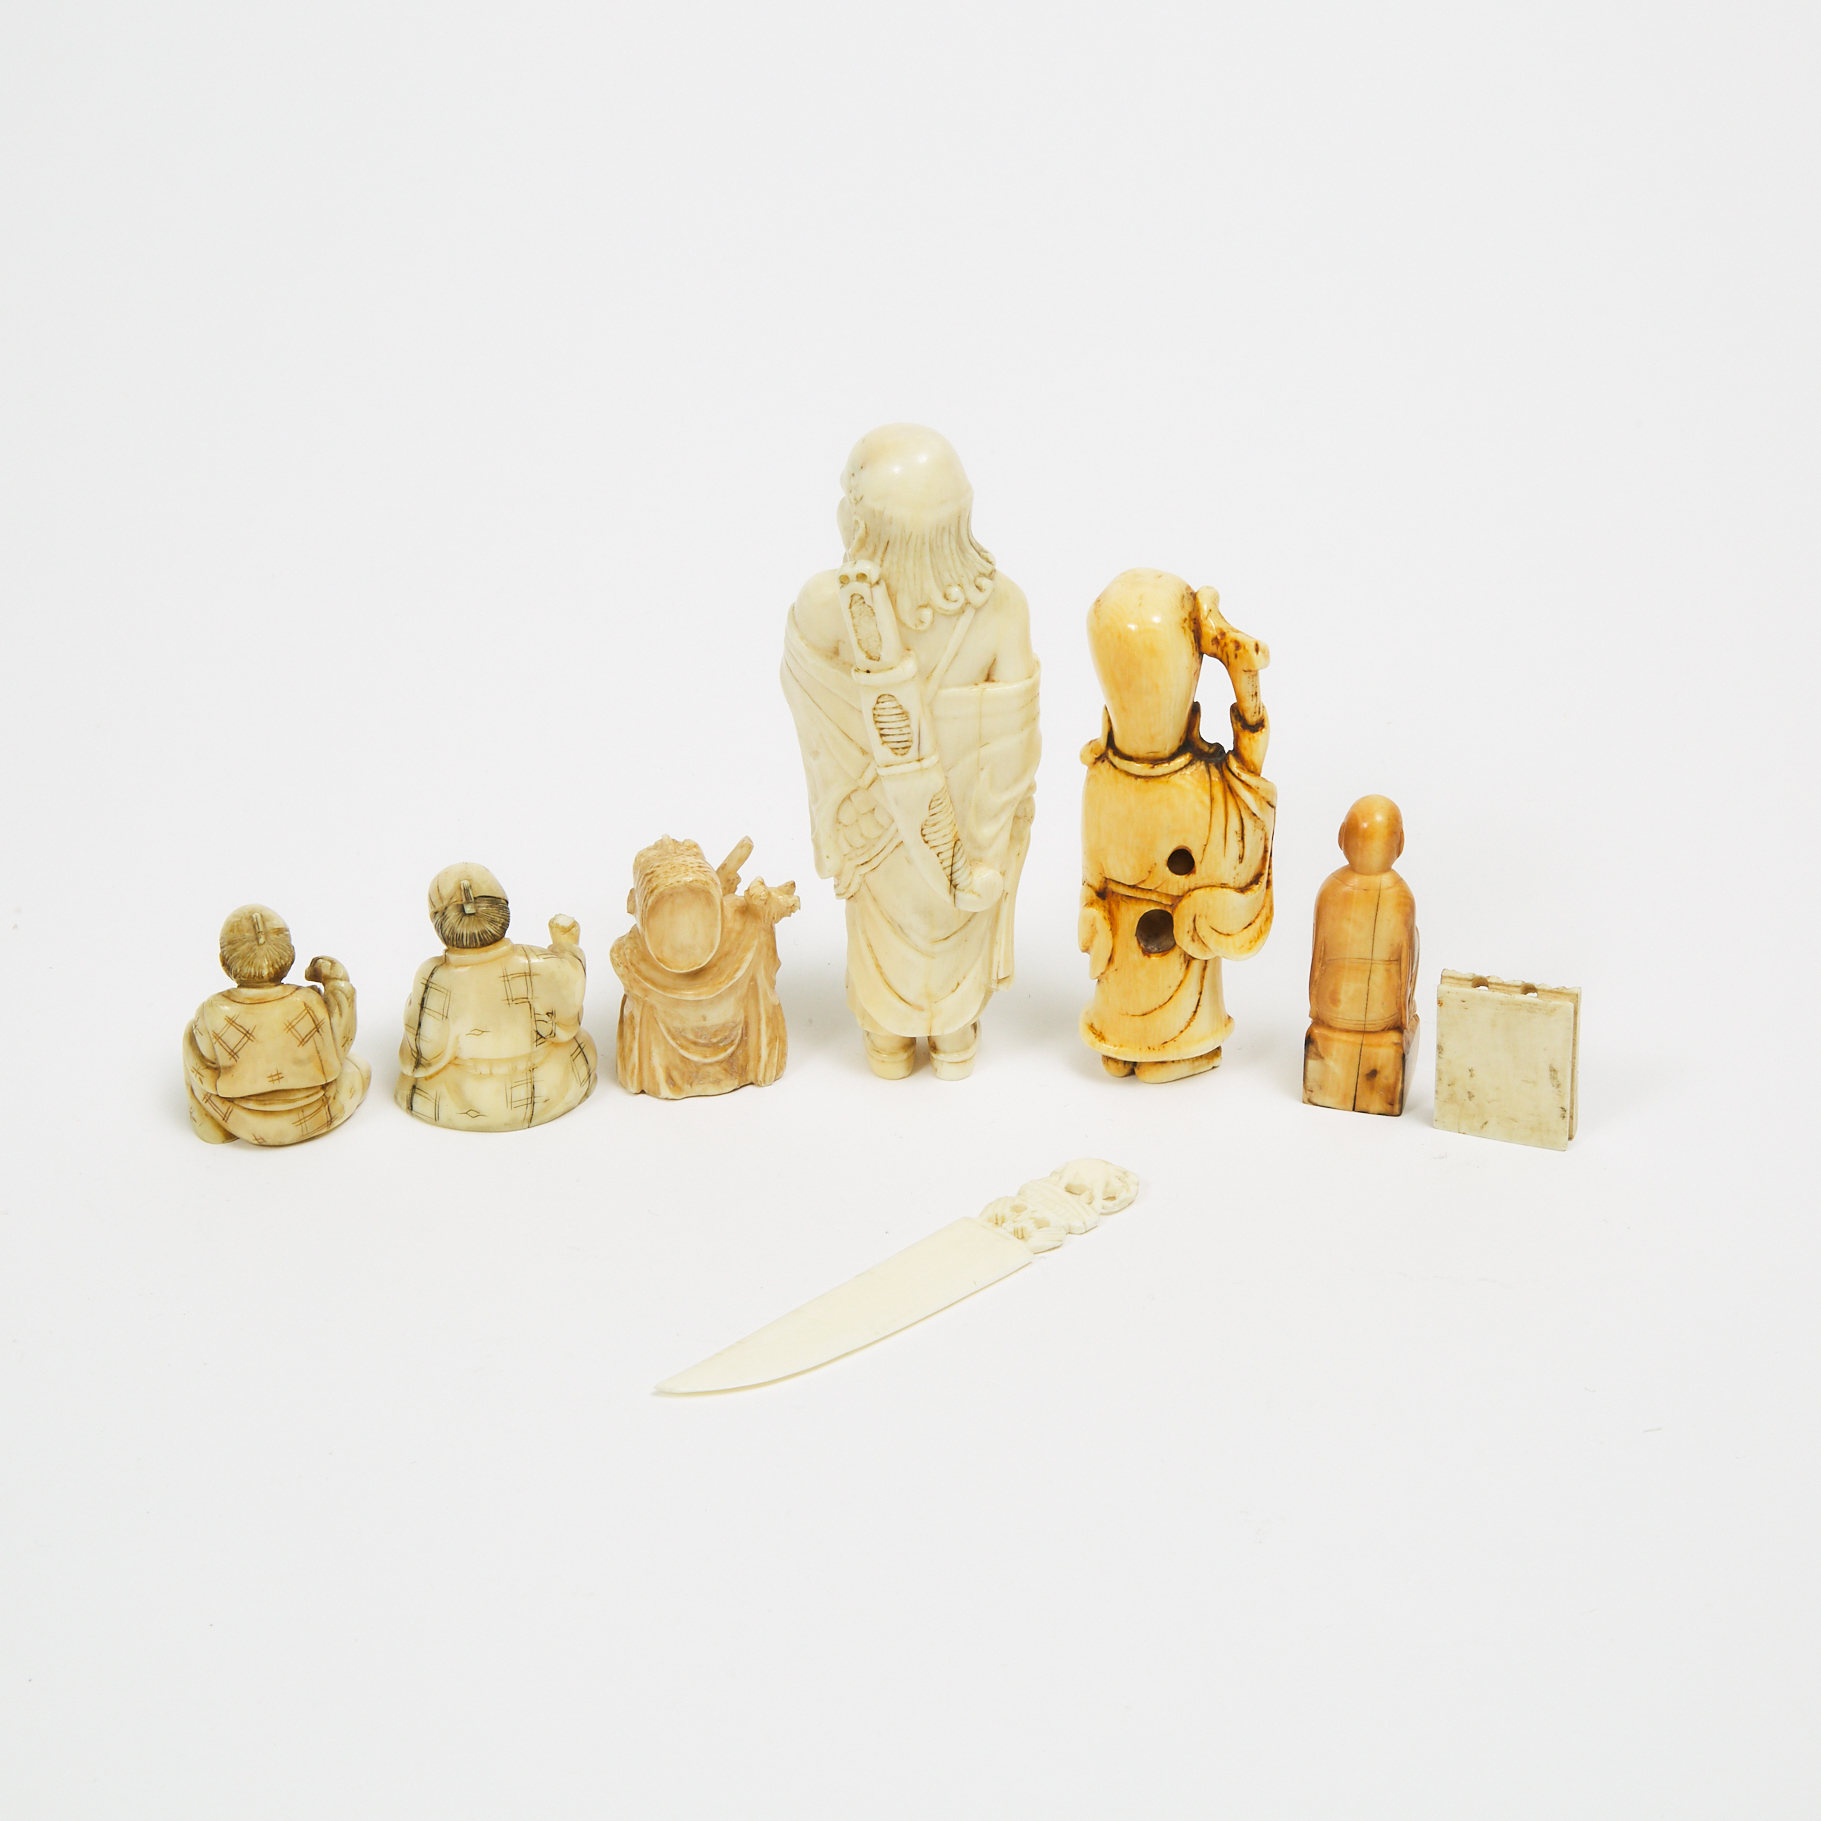 A Group of Eight Ivory Netsuke and Miscellaneous Carvings, 18th/19th Century